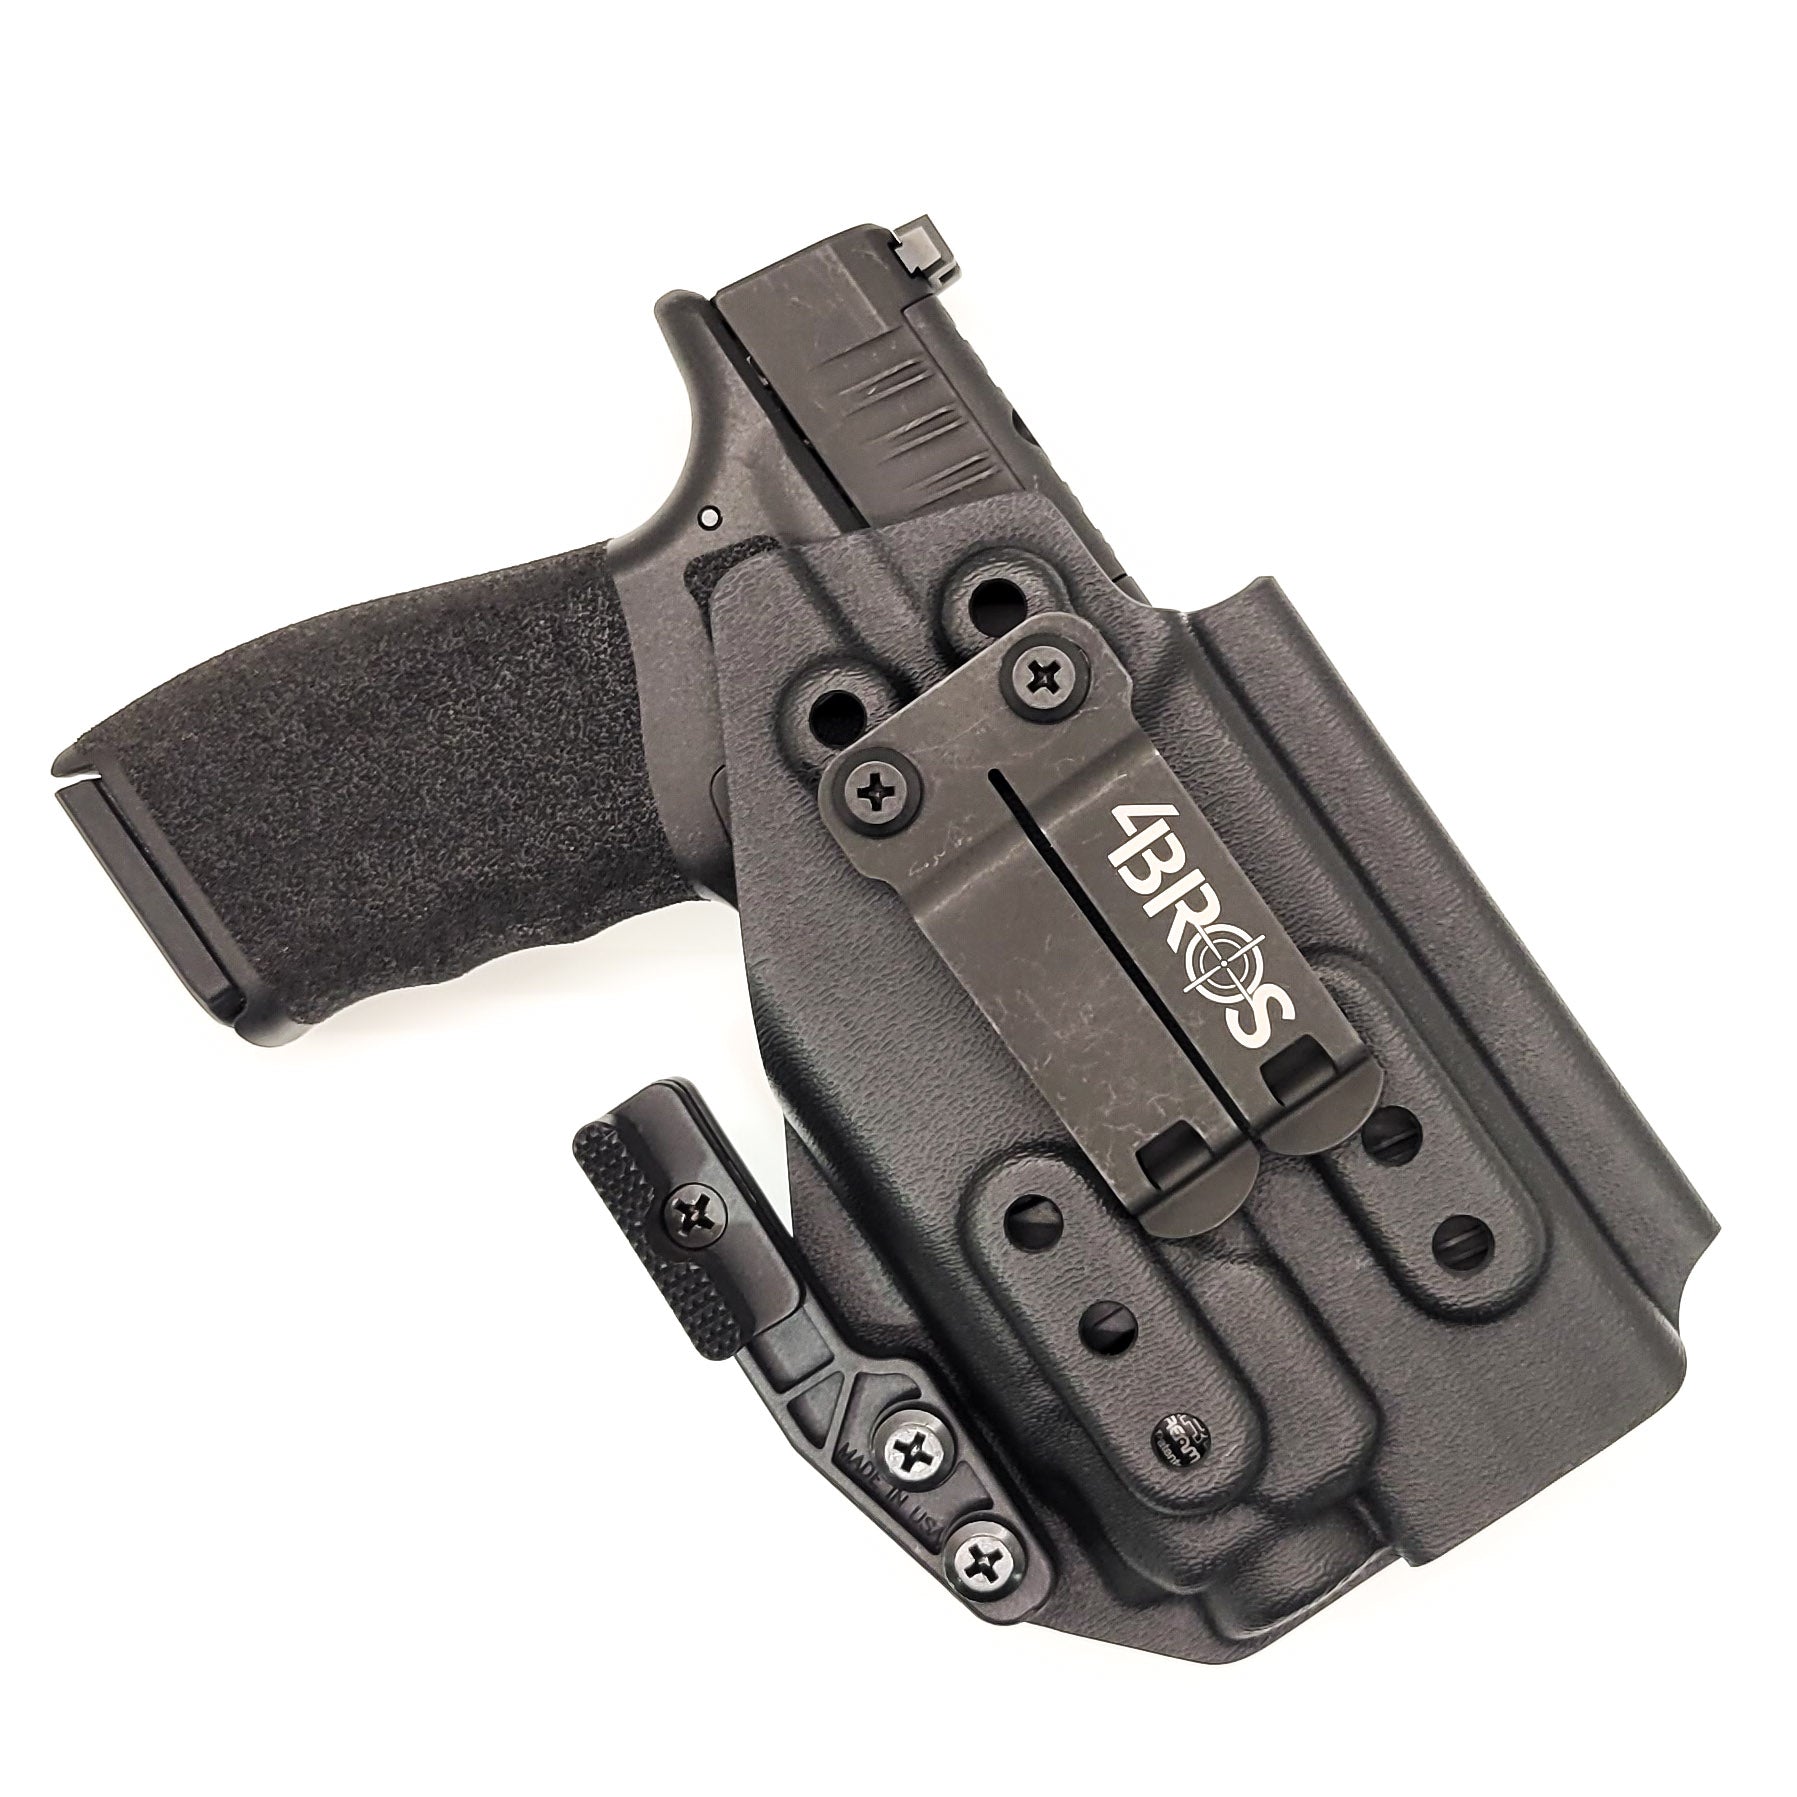 Inside Waistband Holster designed to fit the Springfield Hellcat Pro pistol with the Streamlight TLR-8 & TLR-8A light mounted to the handgun. The holster retention is on the light itself and not the pistol. Full sweat guard, adjustable retention, minimal material, and smooth edges to reduce printing. Made in the USA.